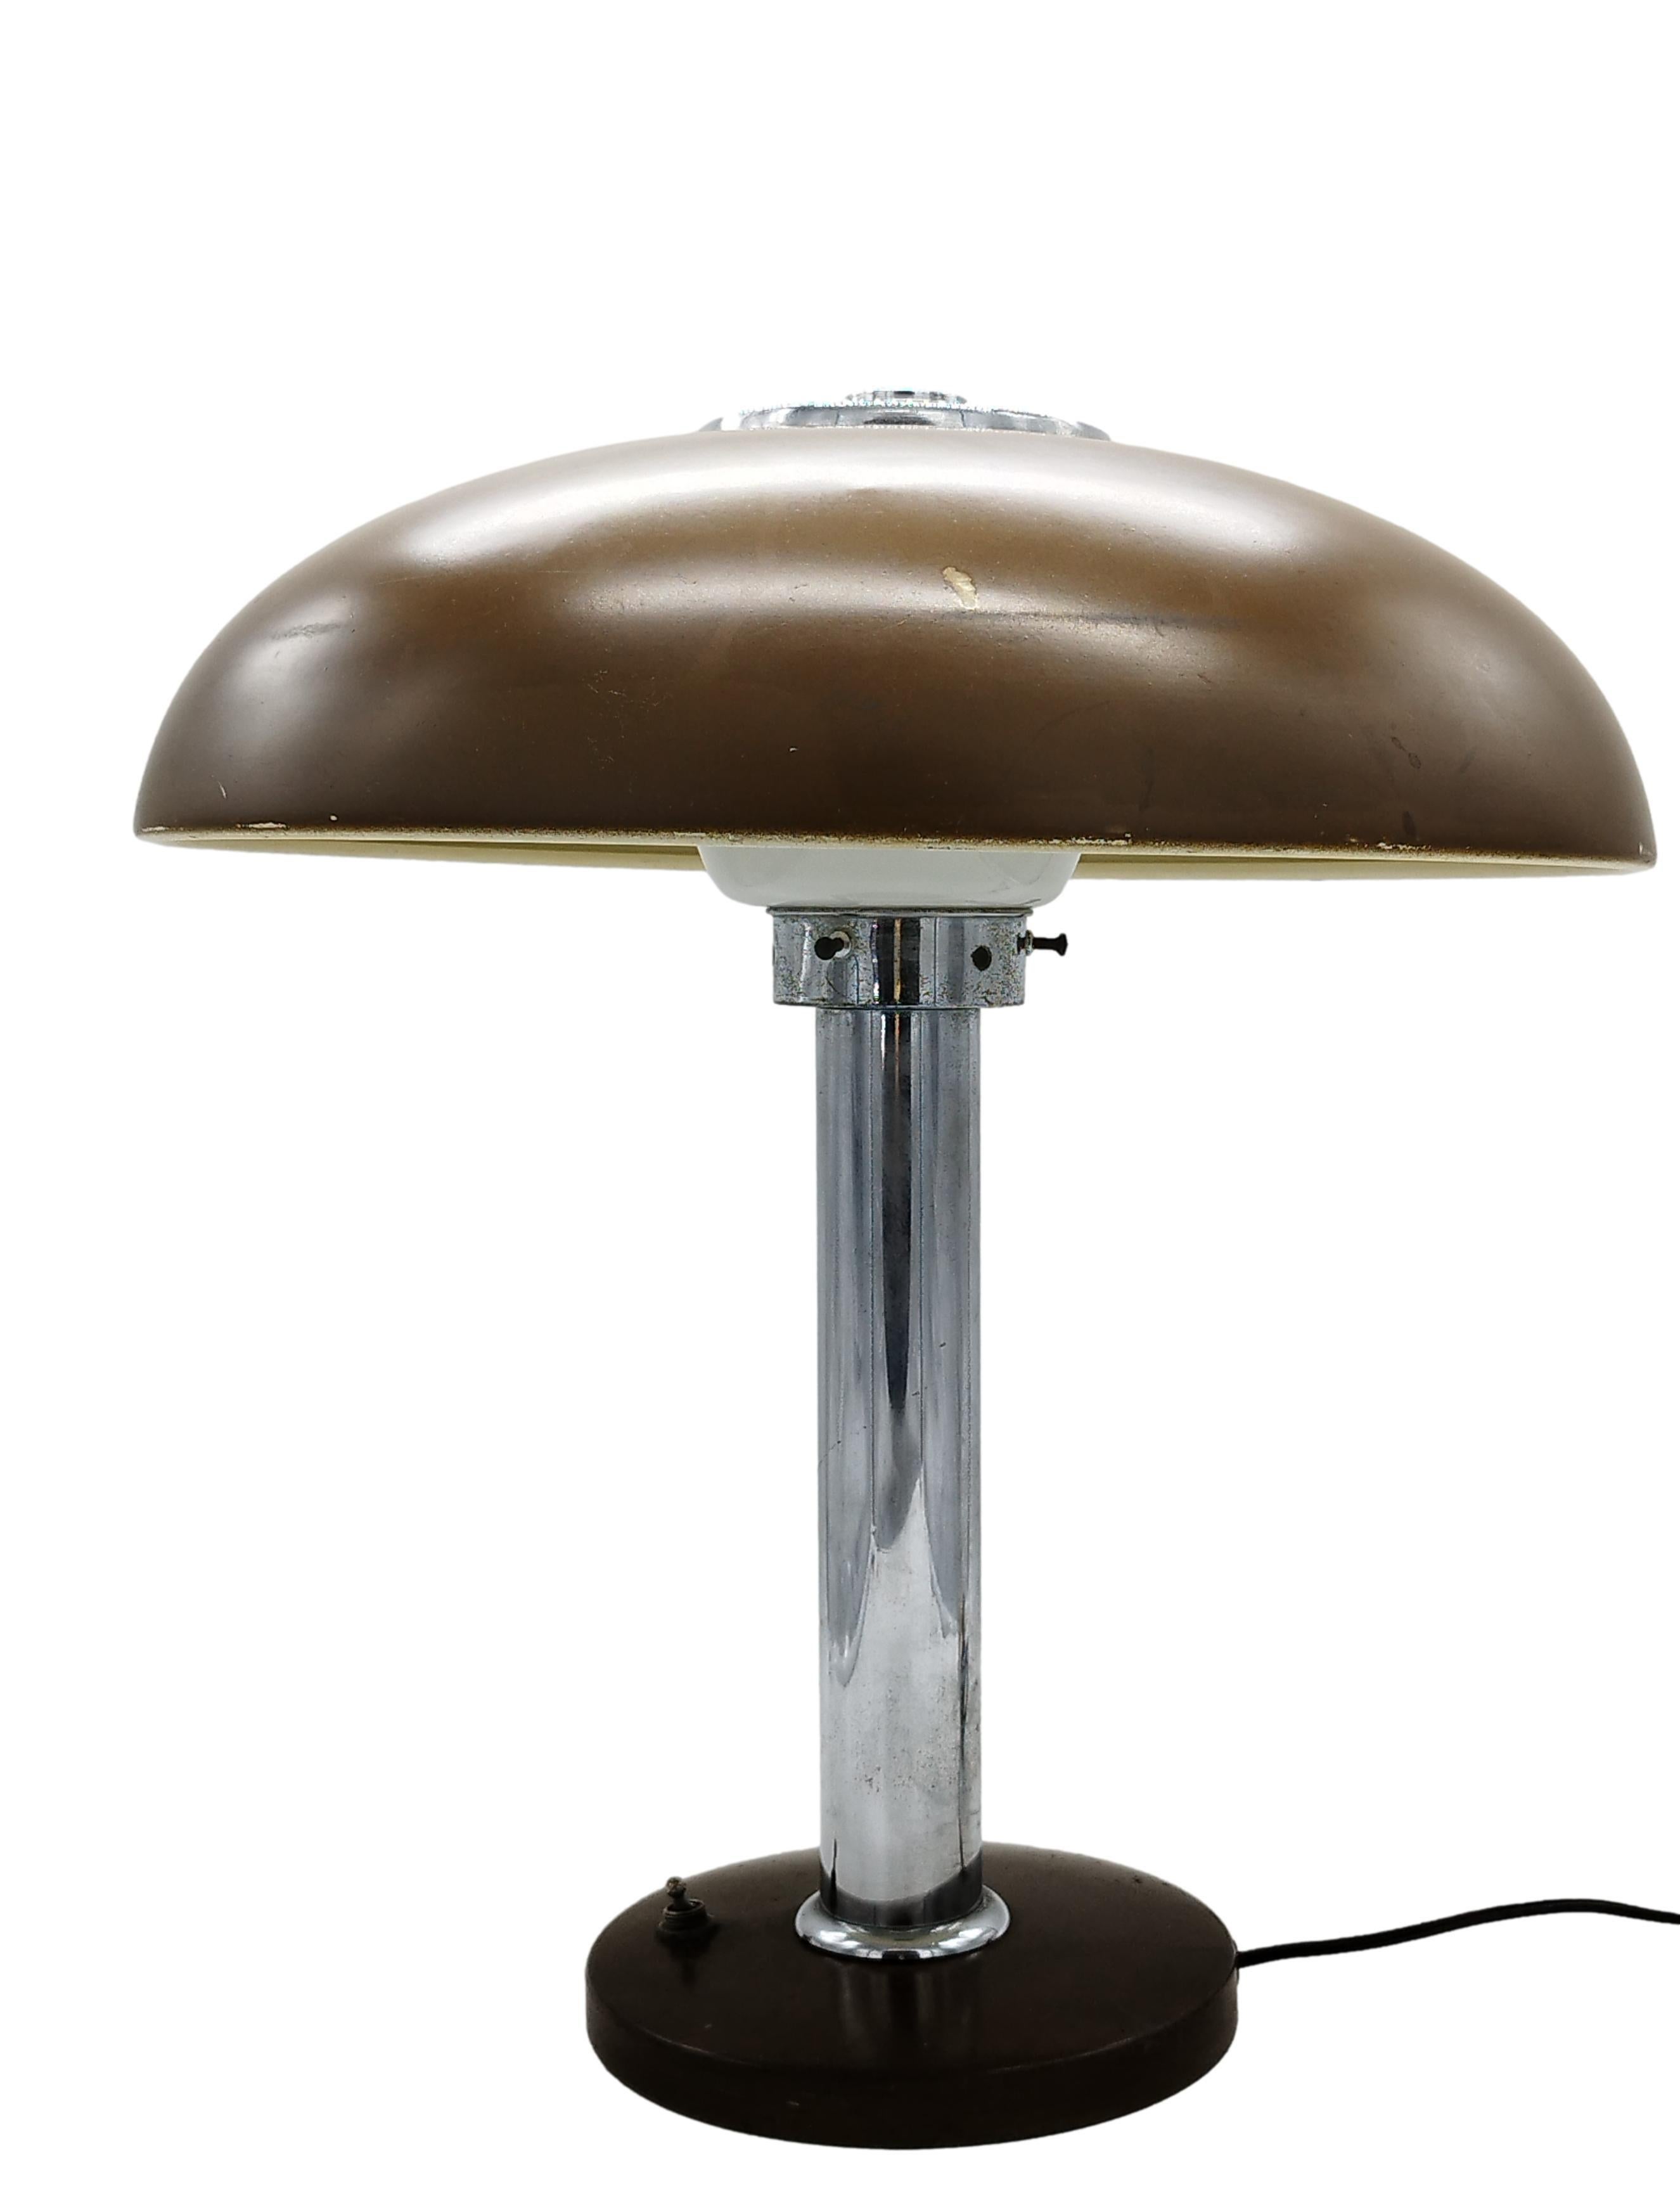 Mid-Century Modern Gio Ponti for Ugo Pollice Model 546 Table Lamp, Italy, 1940s For Sale